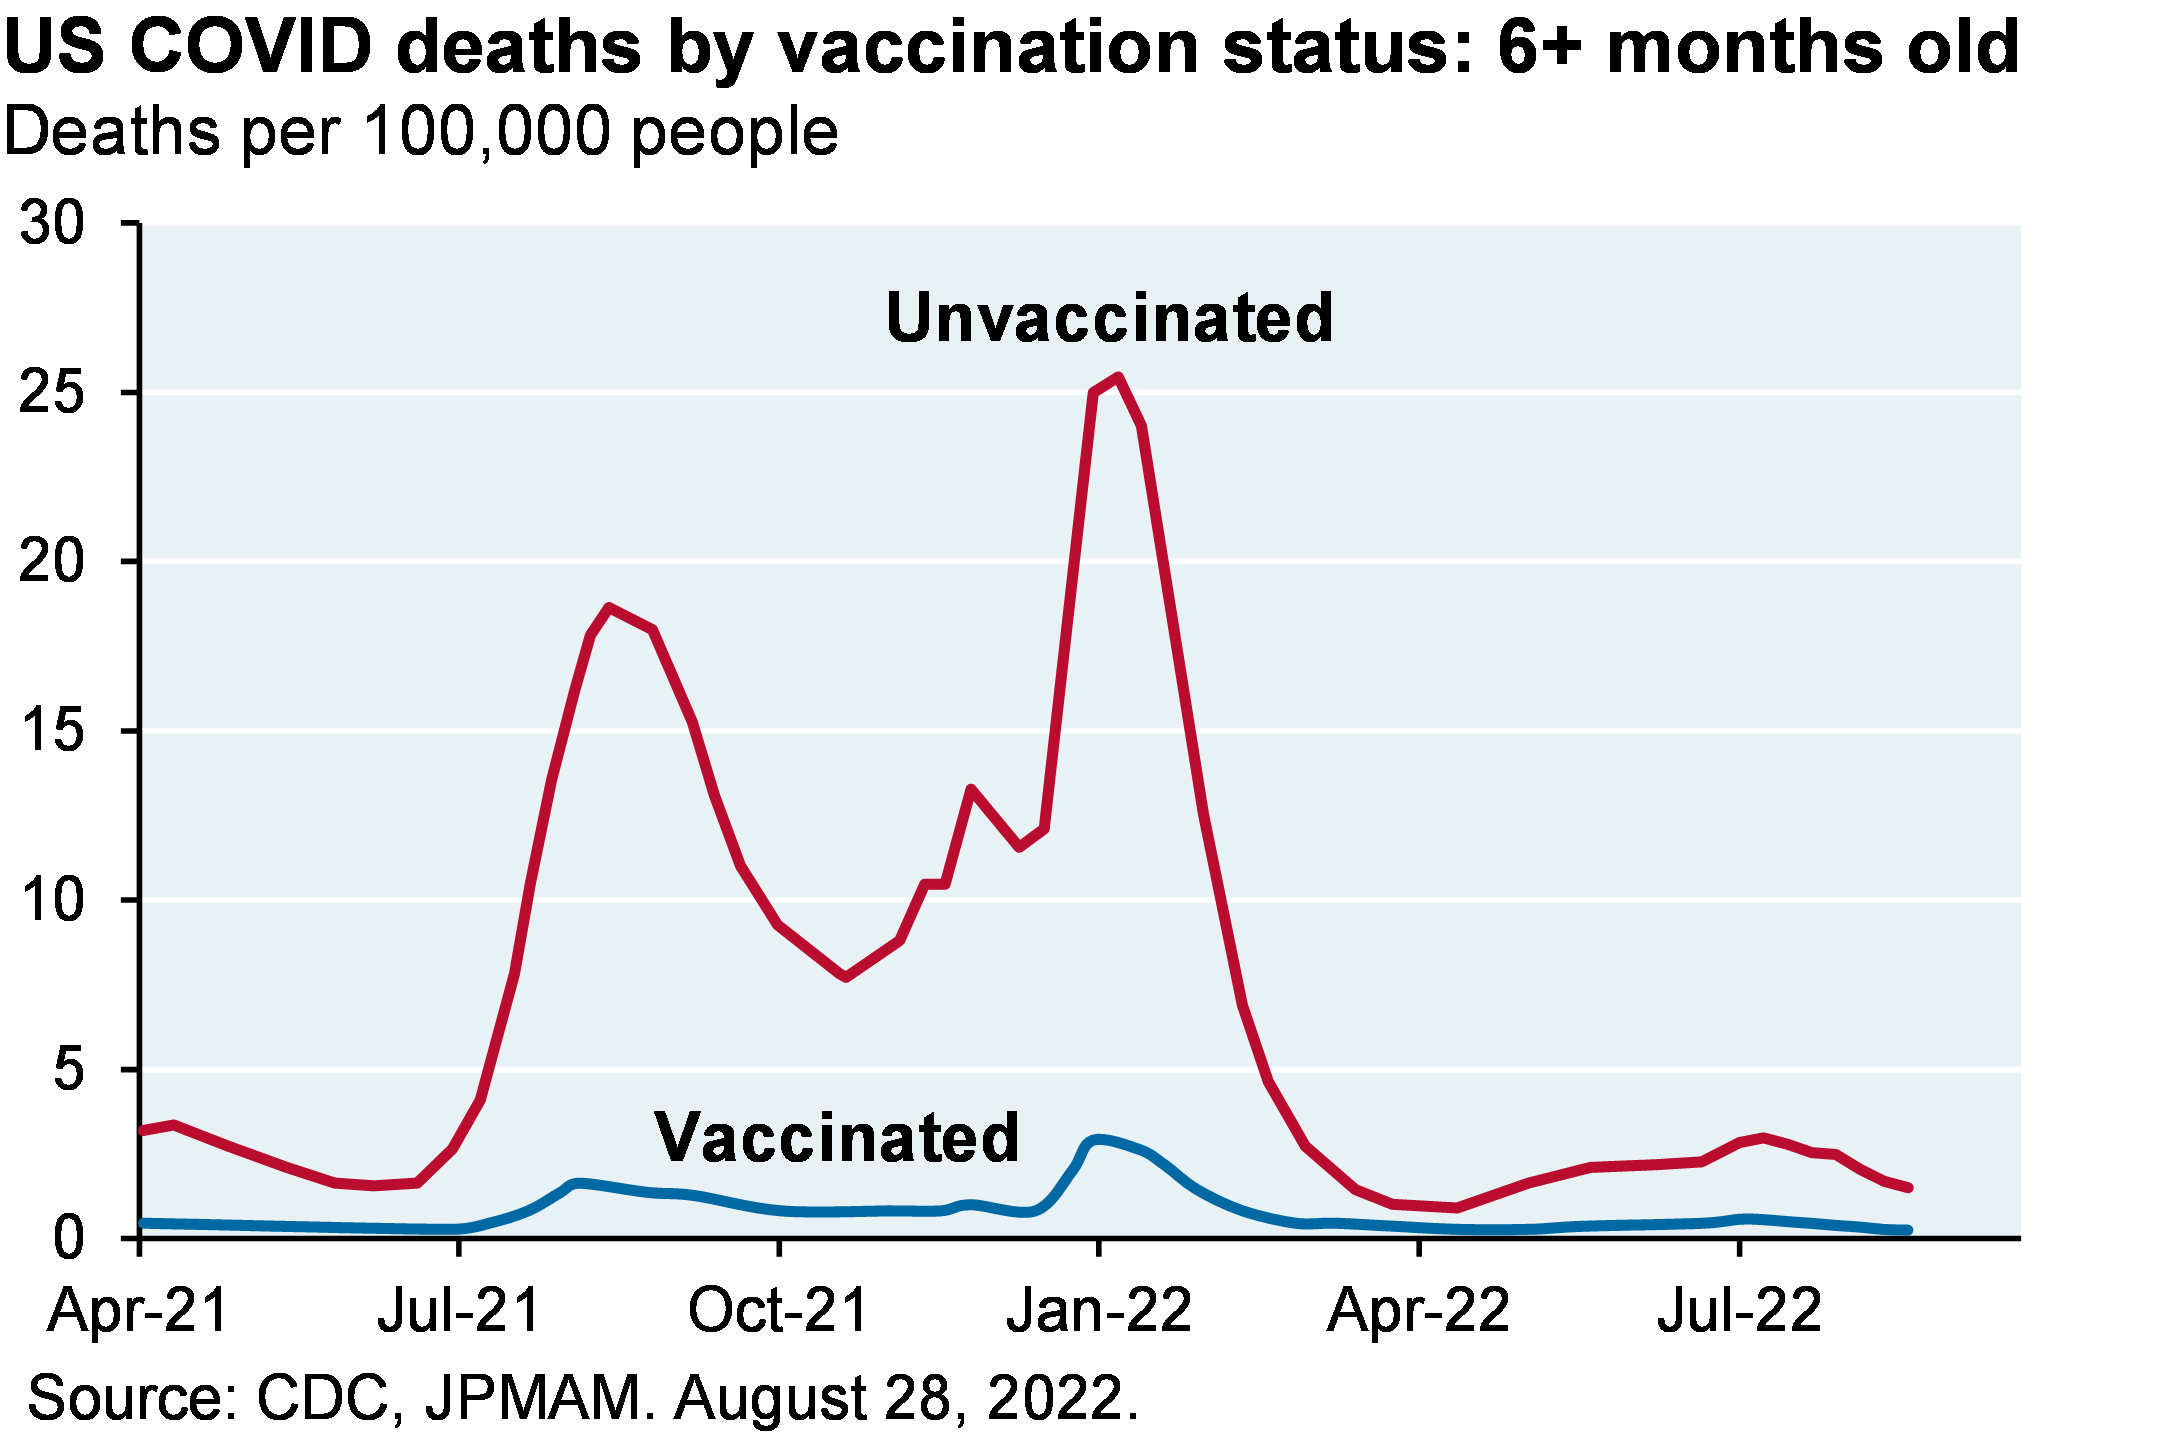 US COVID deaths by vaccination status: 6+ months old